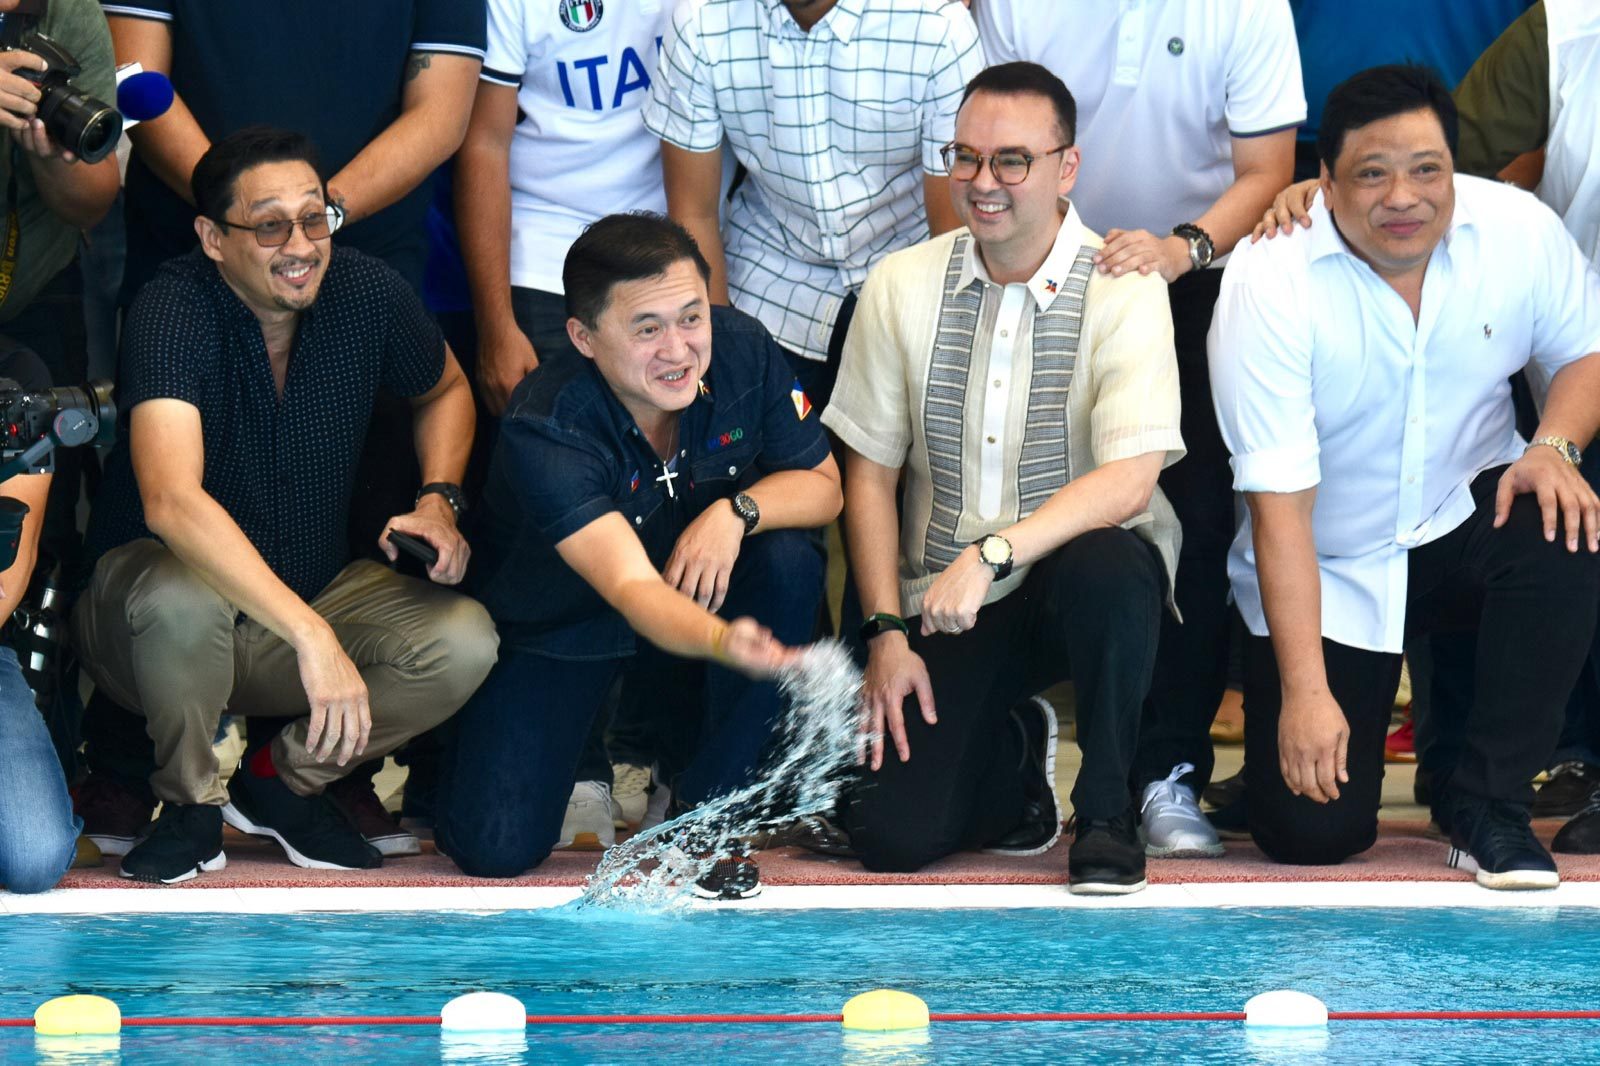 LAWMAKERS' INSPECTION. Senator Bong Go and House Speaker Alan Peter Cayetano pose for the cameras inside the New Clark City Sports Complex. Photo by Angie de Silva/Rappler 